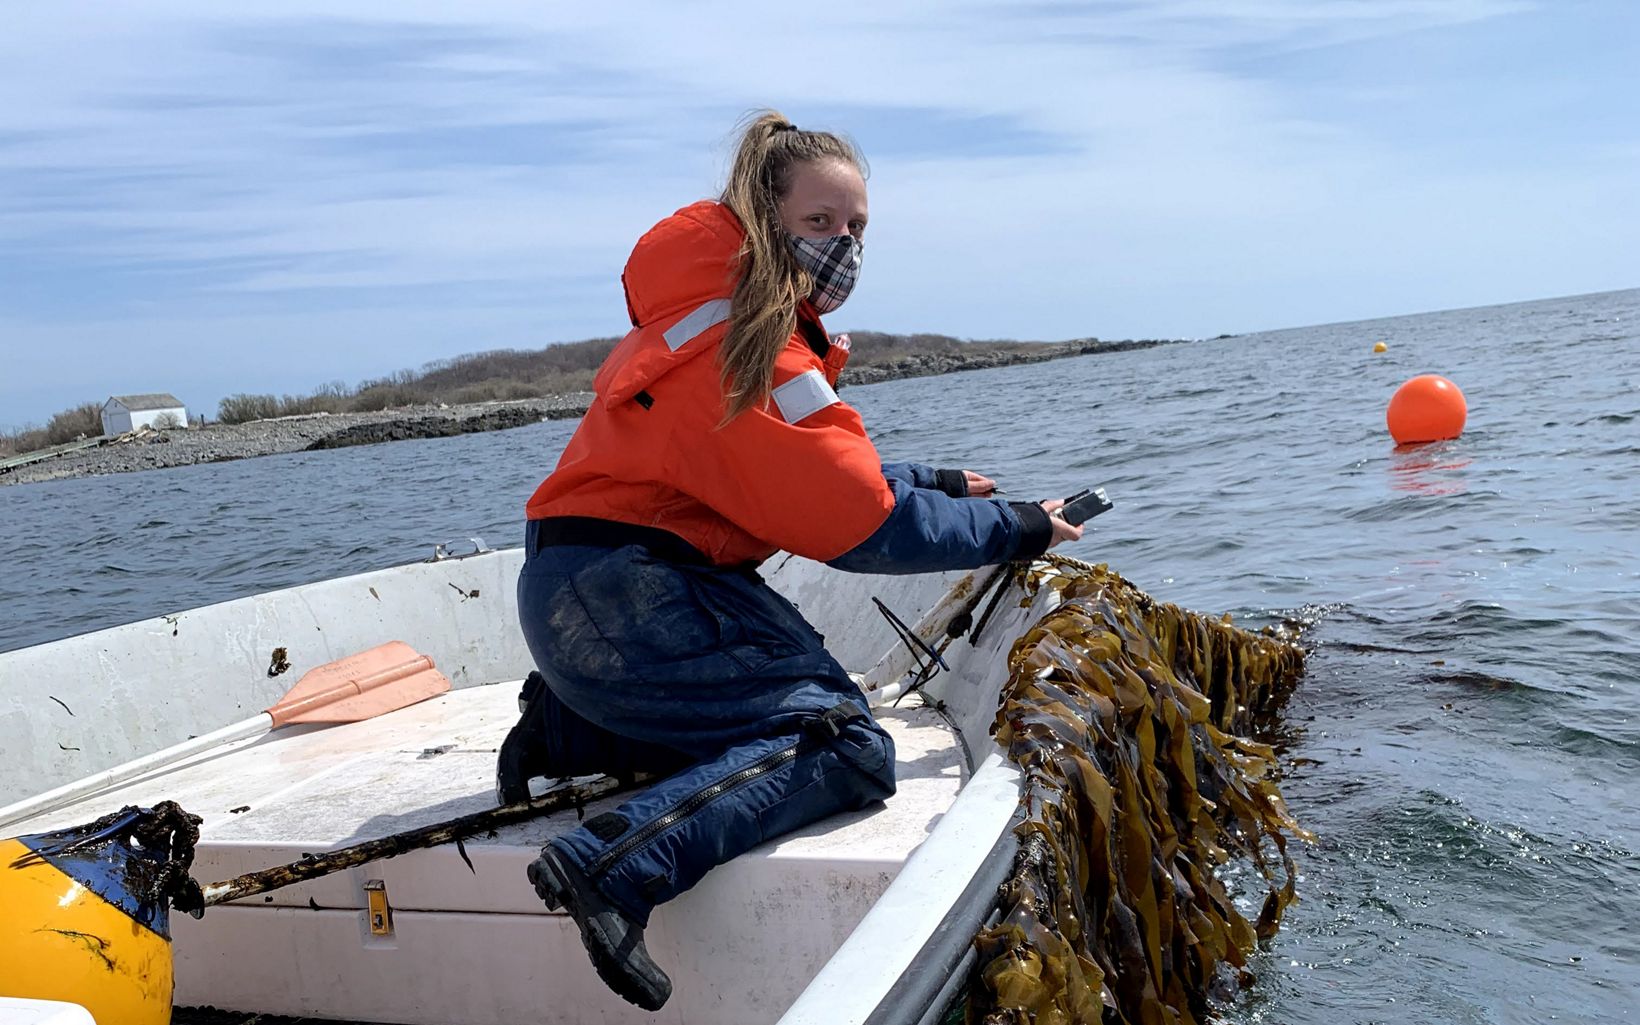 A Closer Look Emilly Schutt investigates a line of kelp at the UNE farm site. © Carrie Byron